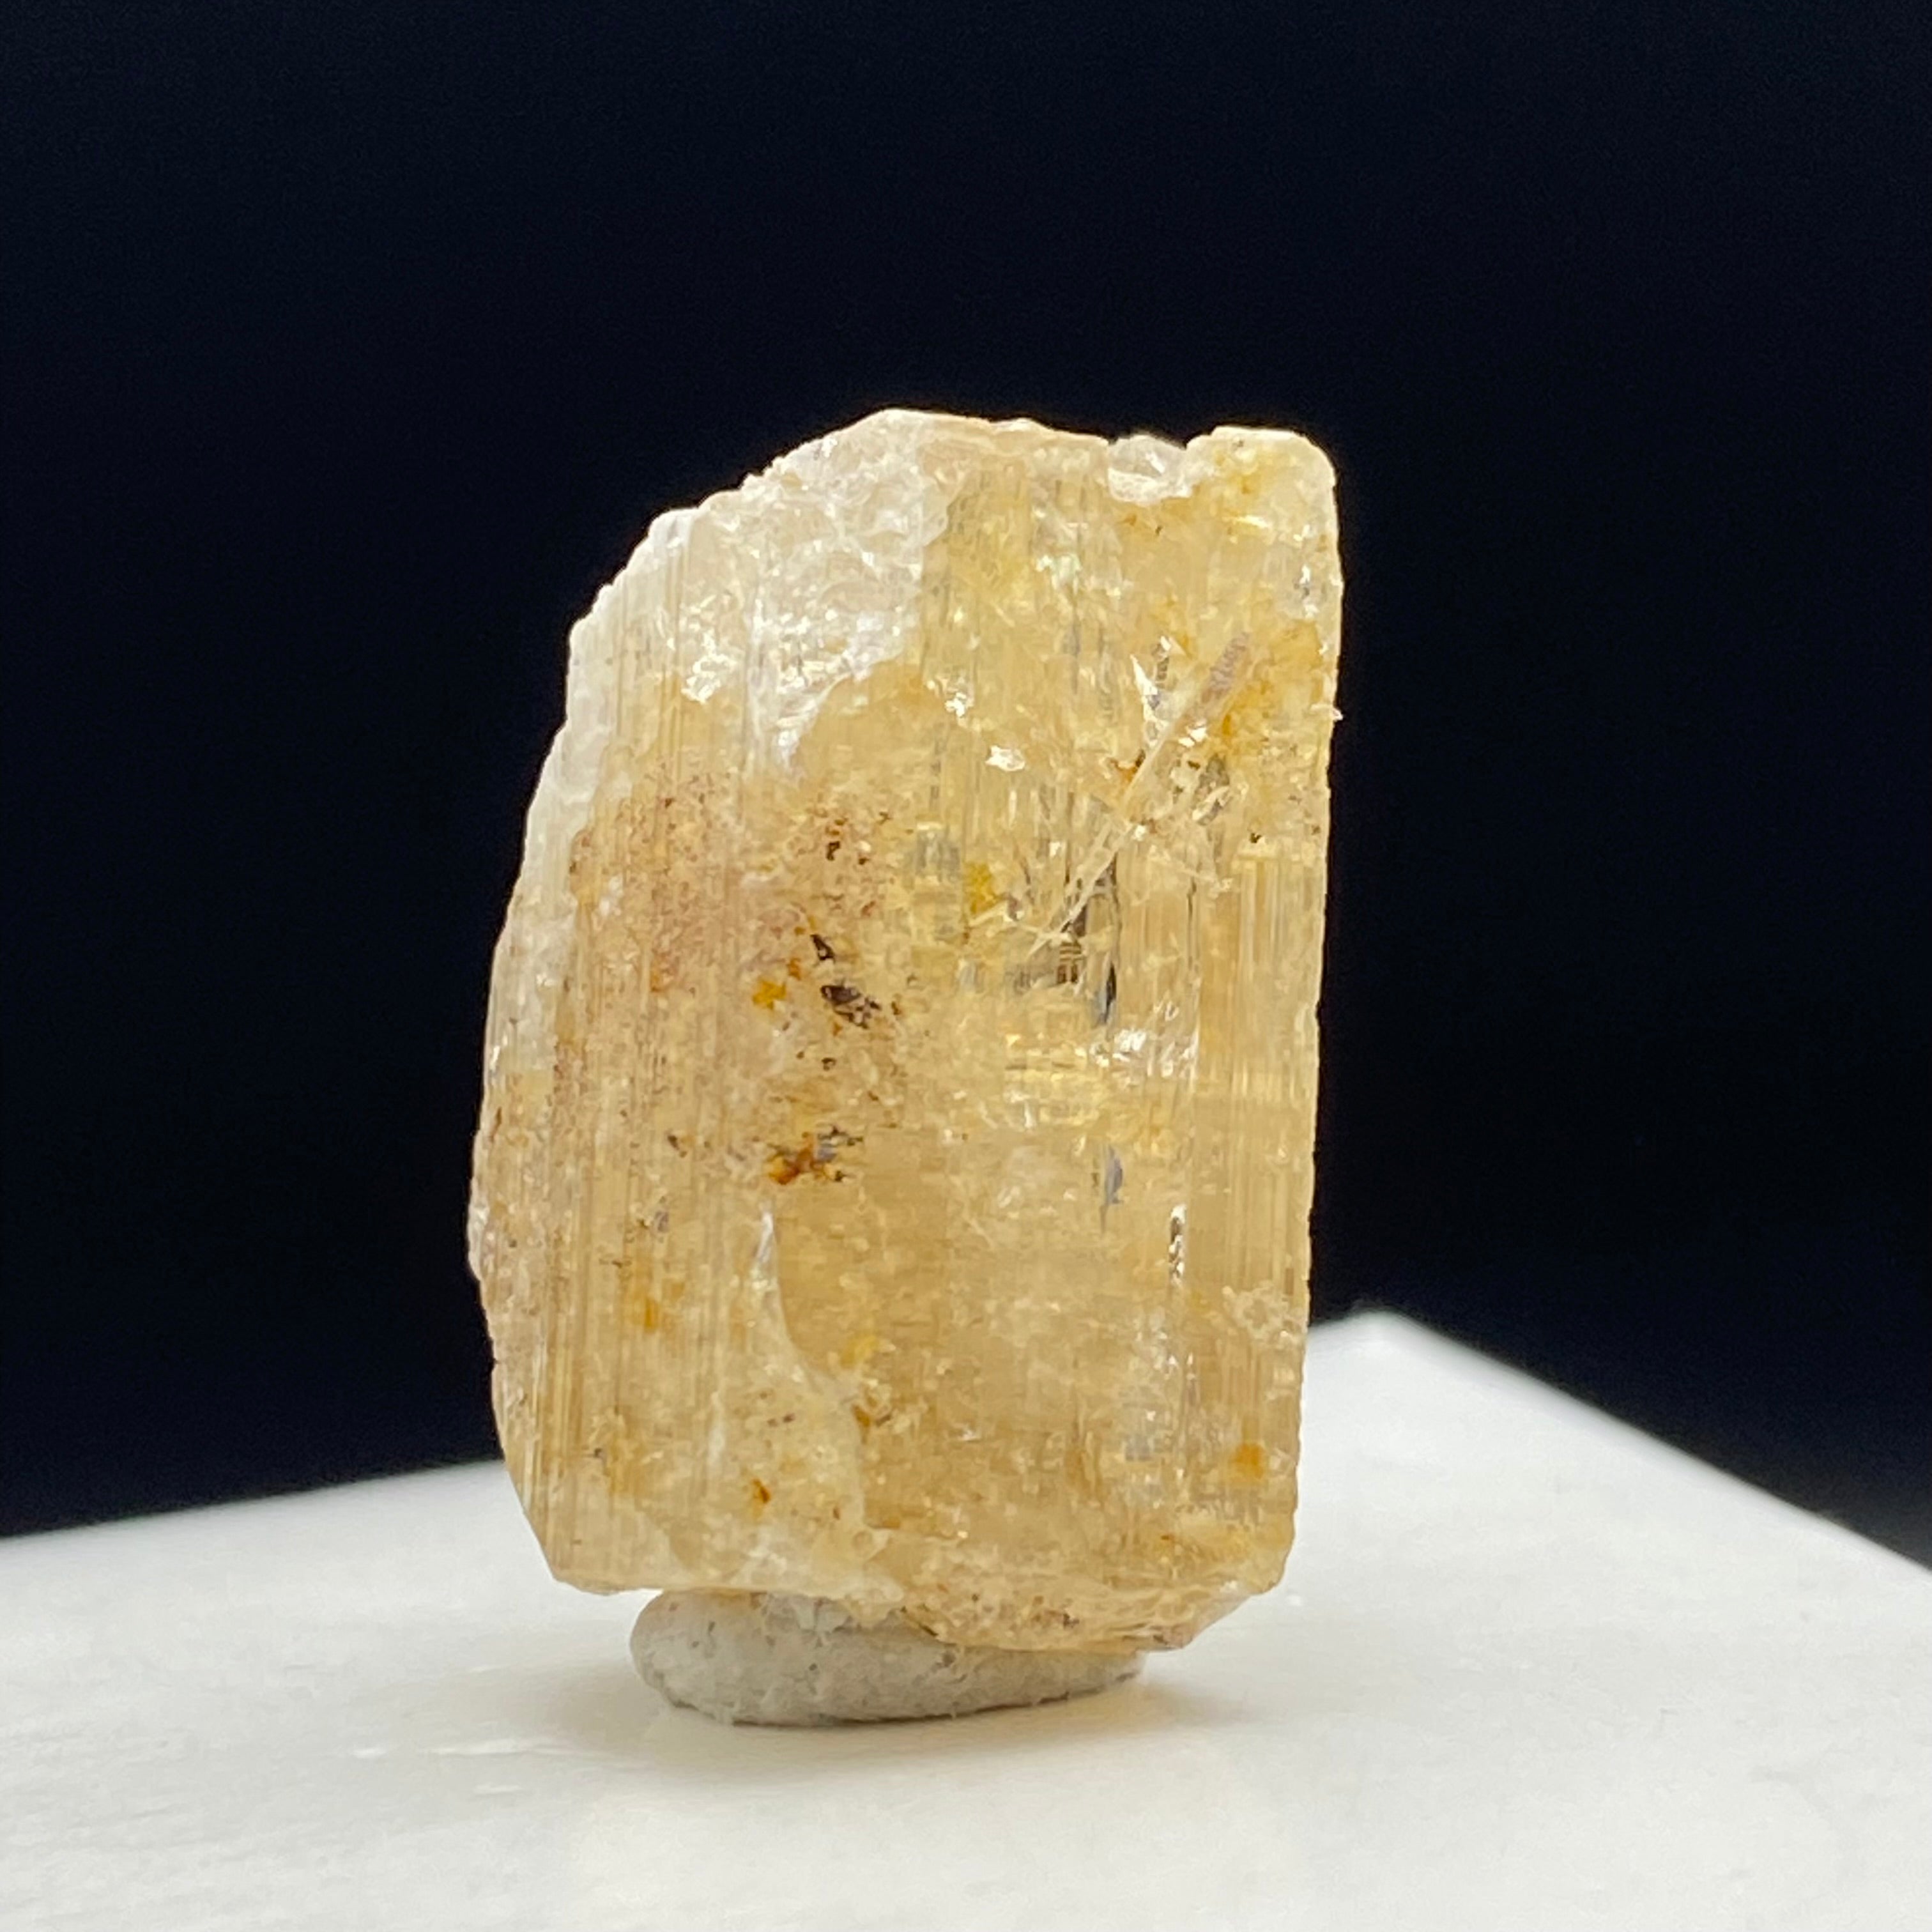 Imperial Topaz Non-Terminated Crystal - 152